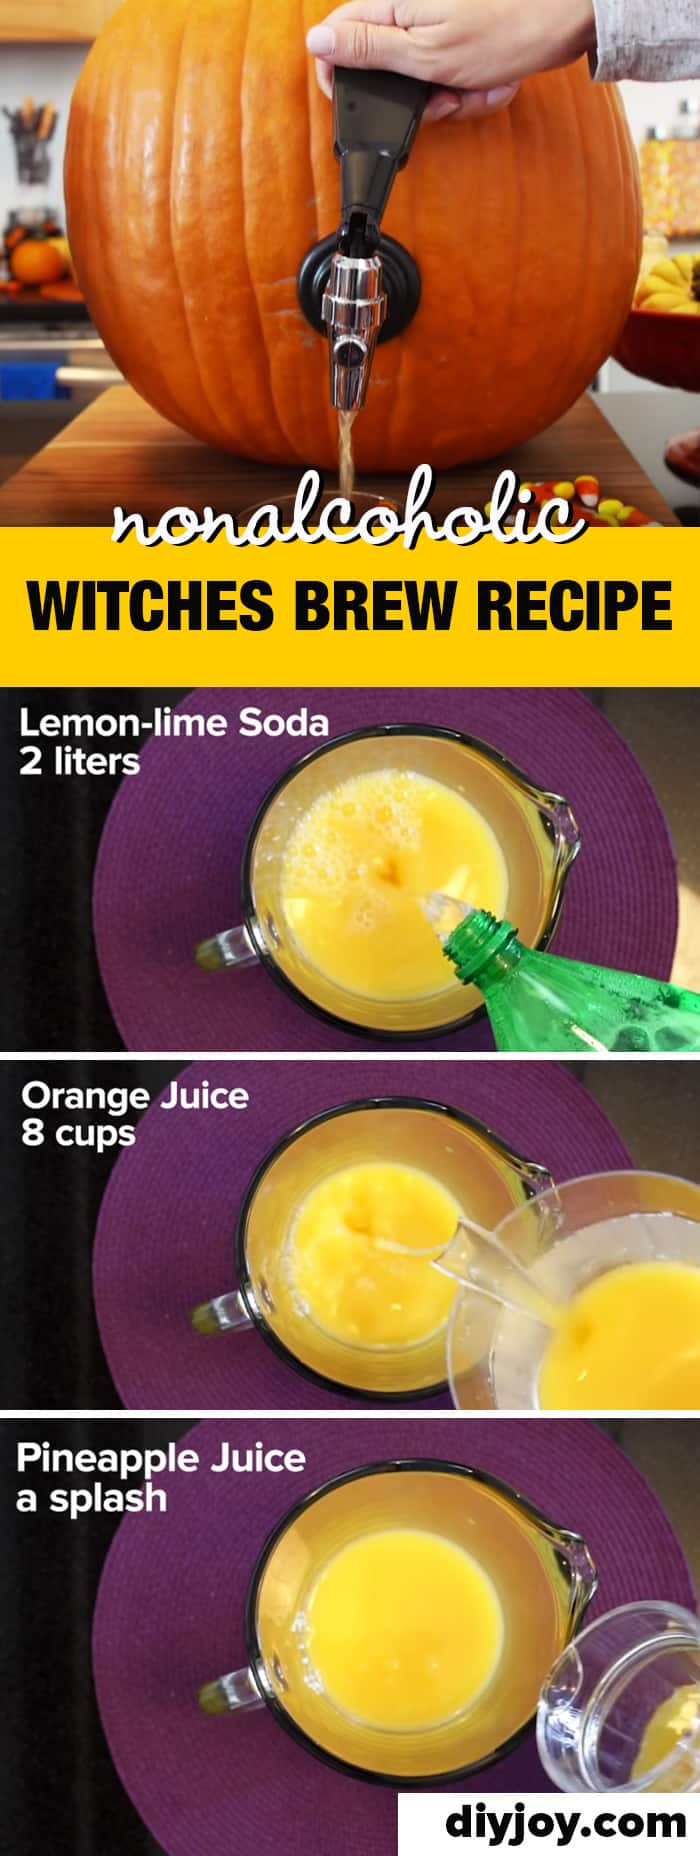 Halloween Drink Recipes - How to Make Non-Alcoholic Witches Brew Punch